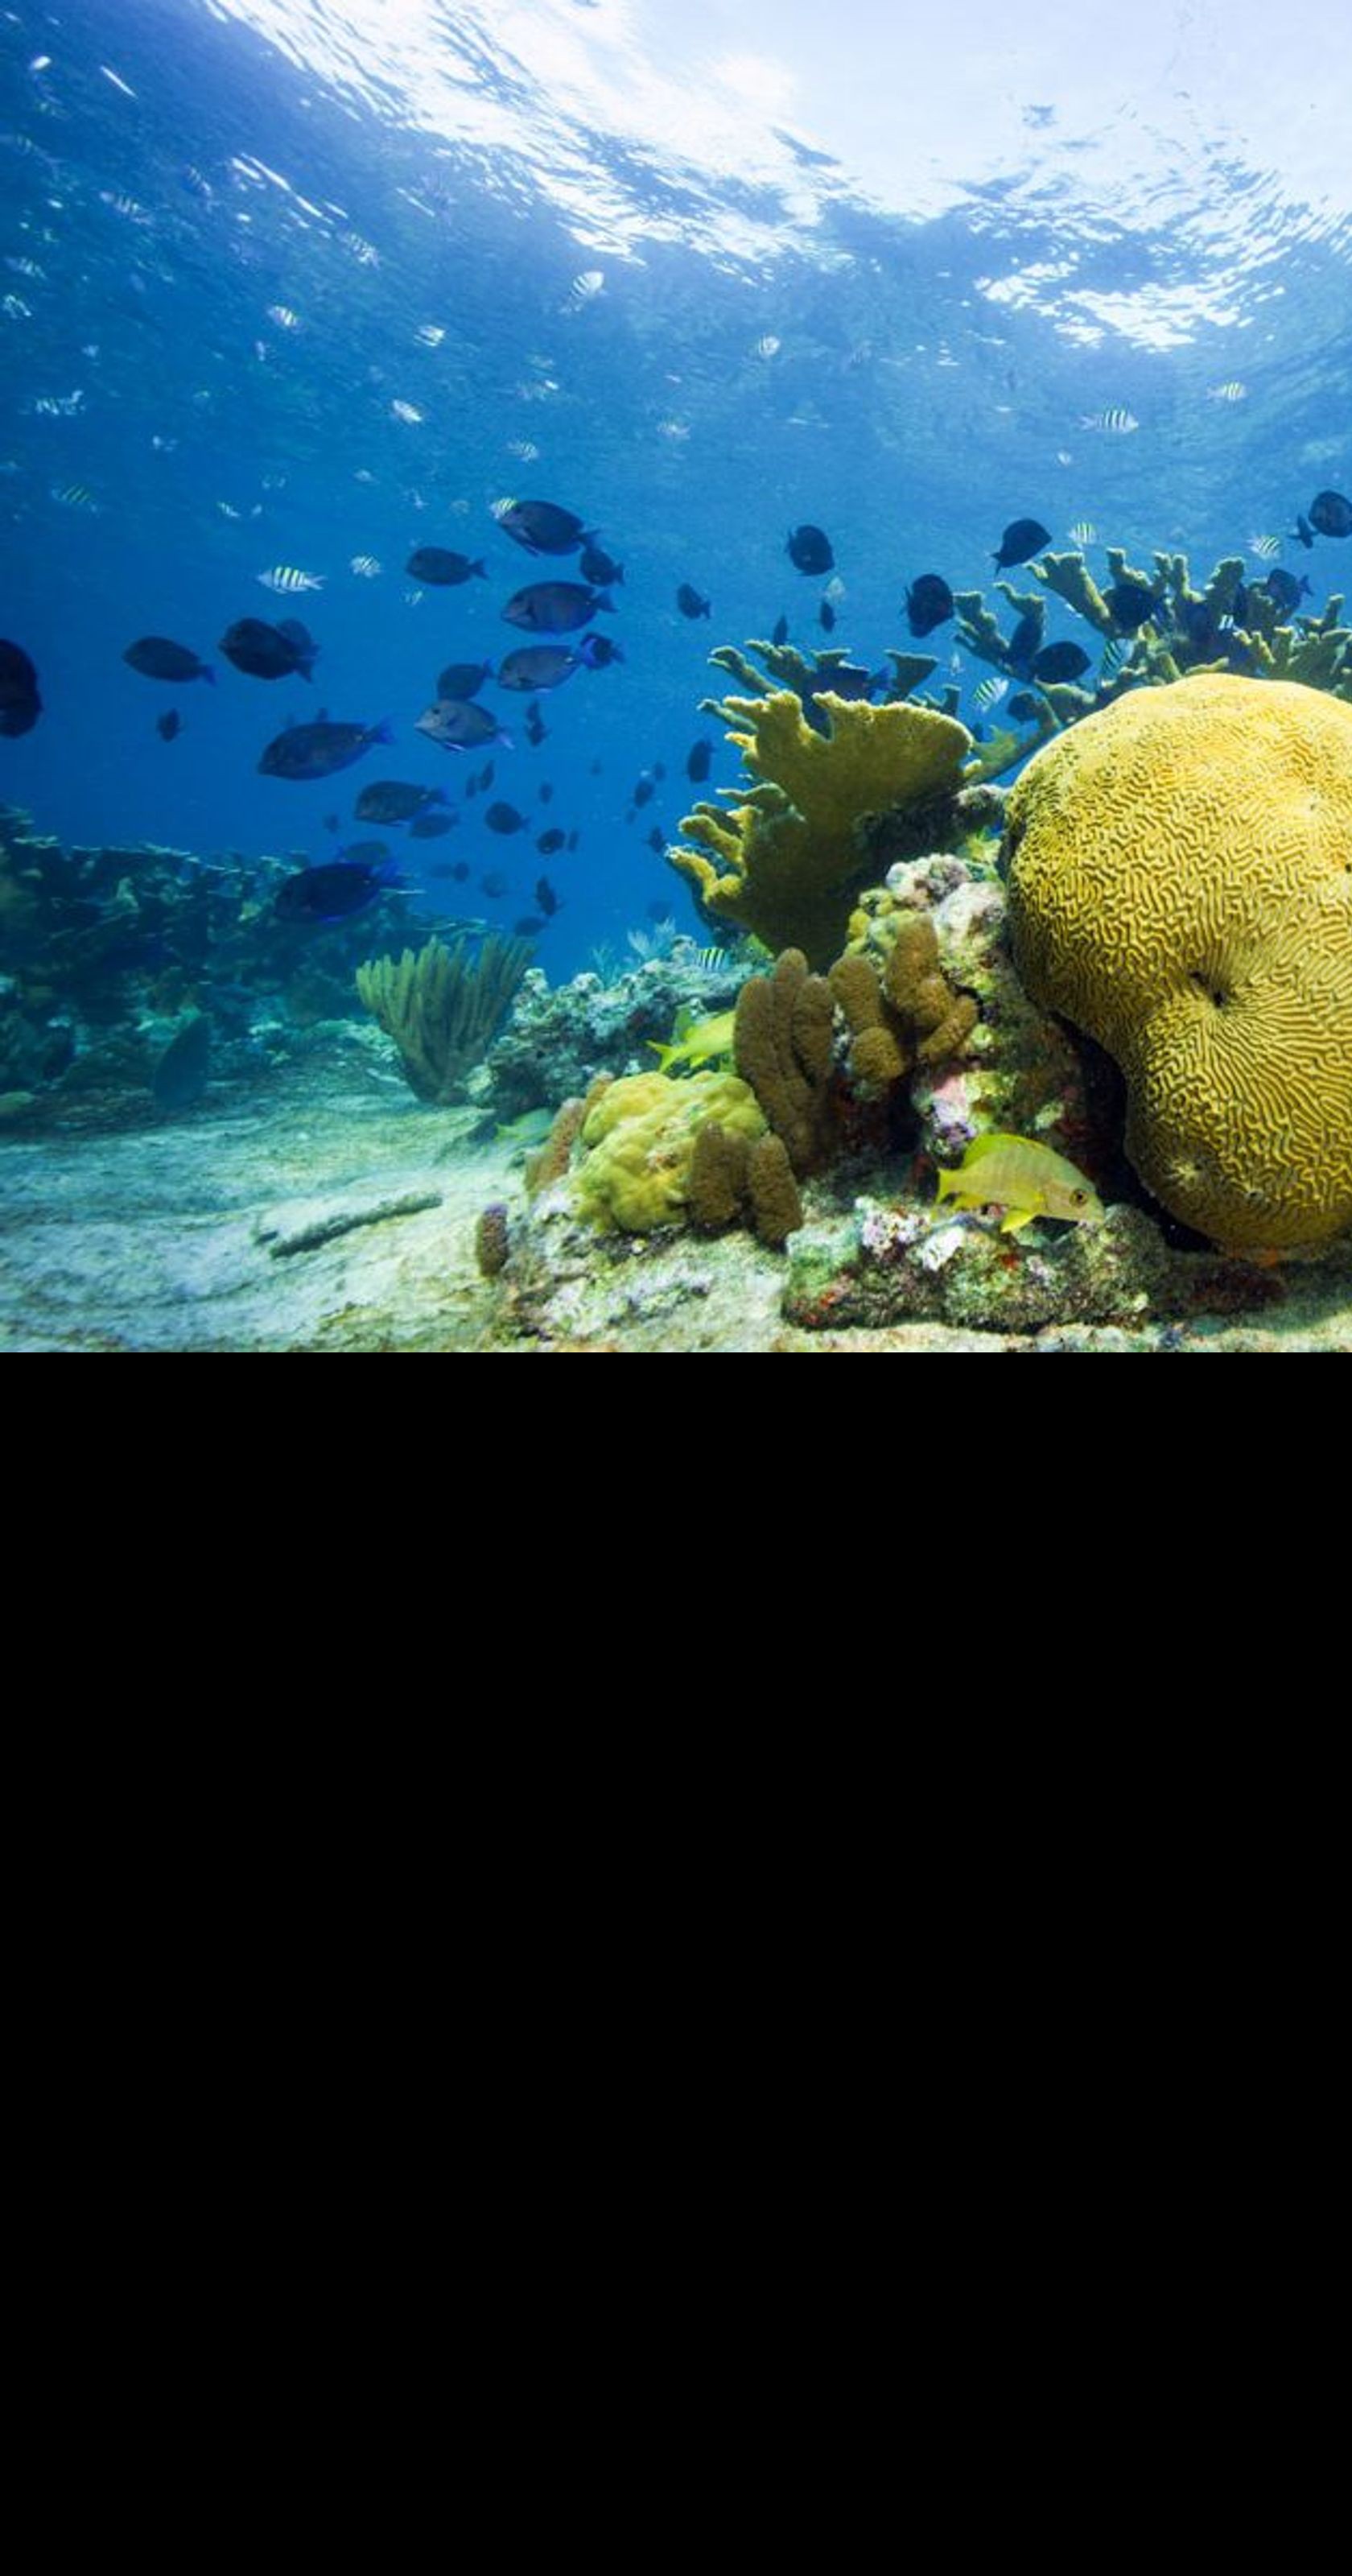 Protecting Florida Keys Coral Reefs by Banning Oxybenzone!